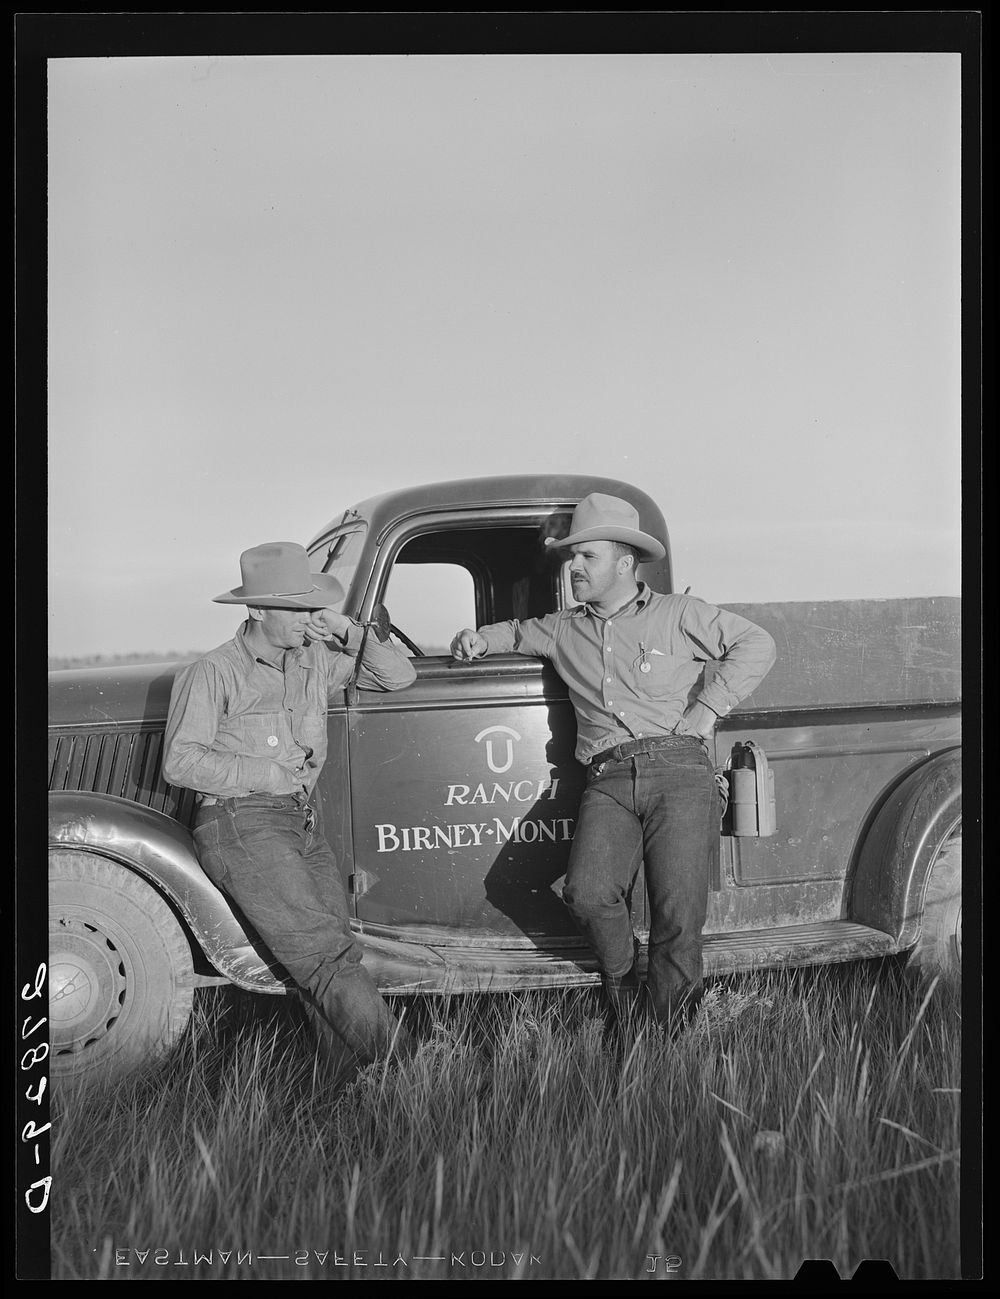 Rancher and cowhand. Quarter Circle 'U' Ranch, Big Horn County, Montana. Sourced from the Library of Congress.